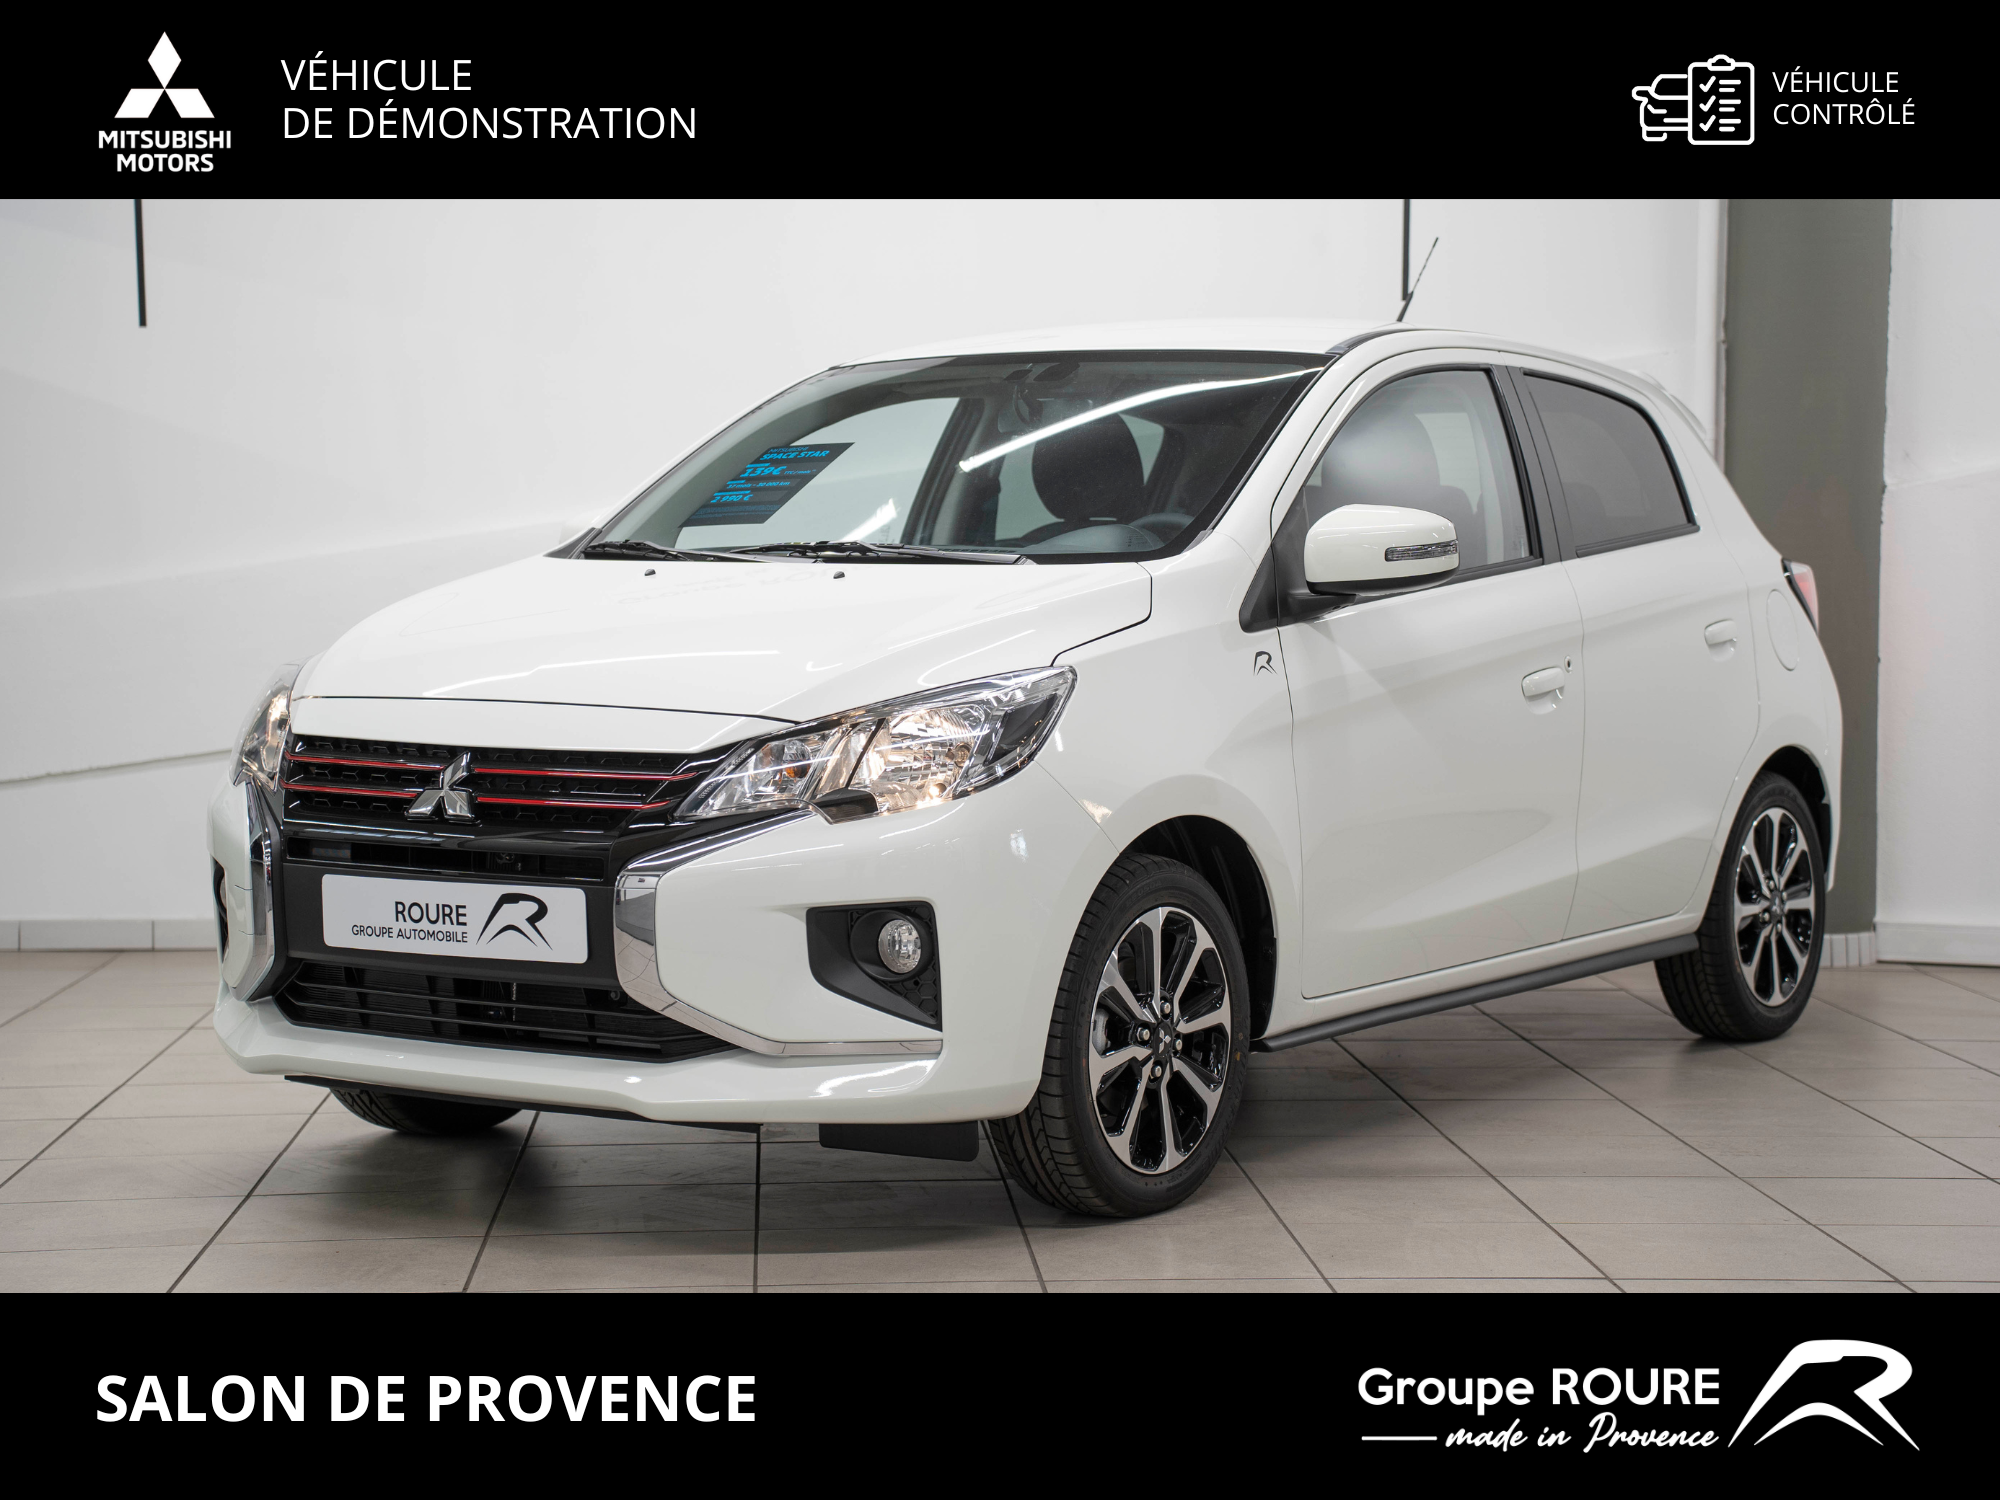 MITSUBISHI-SPACE STAR II-Space Star 1.2 MIVEC 71 AS&G-Red Line Edition-16140-20-roure-automobiles